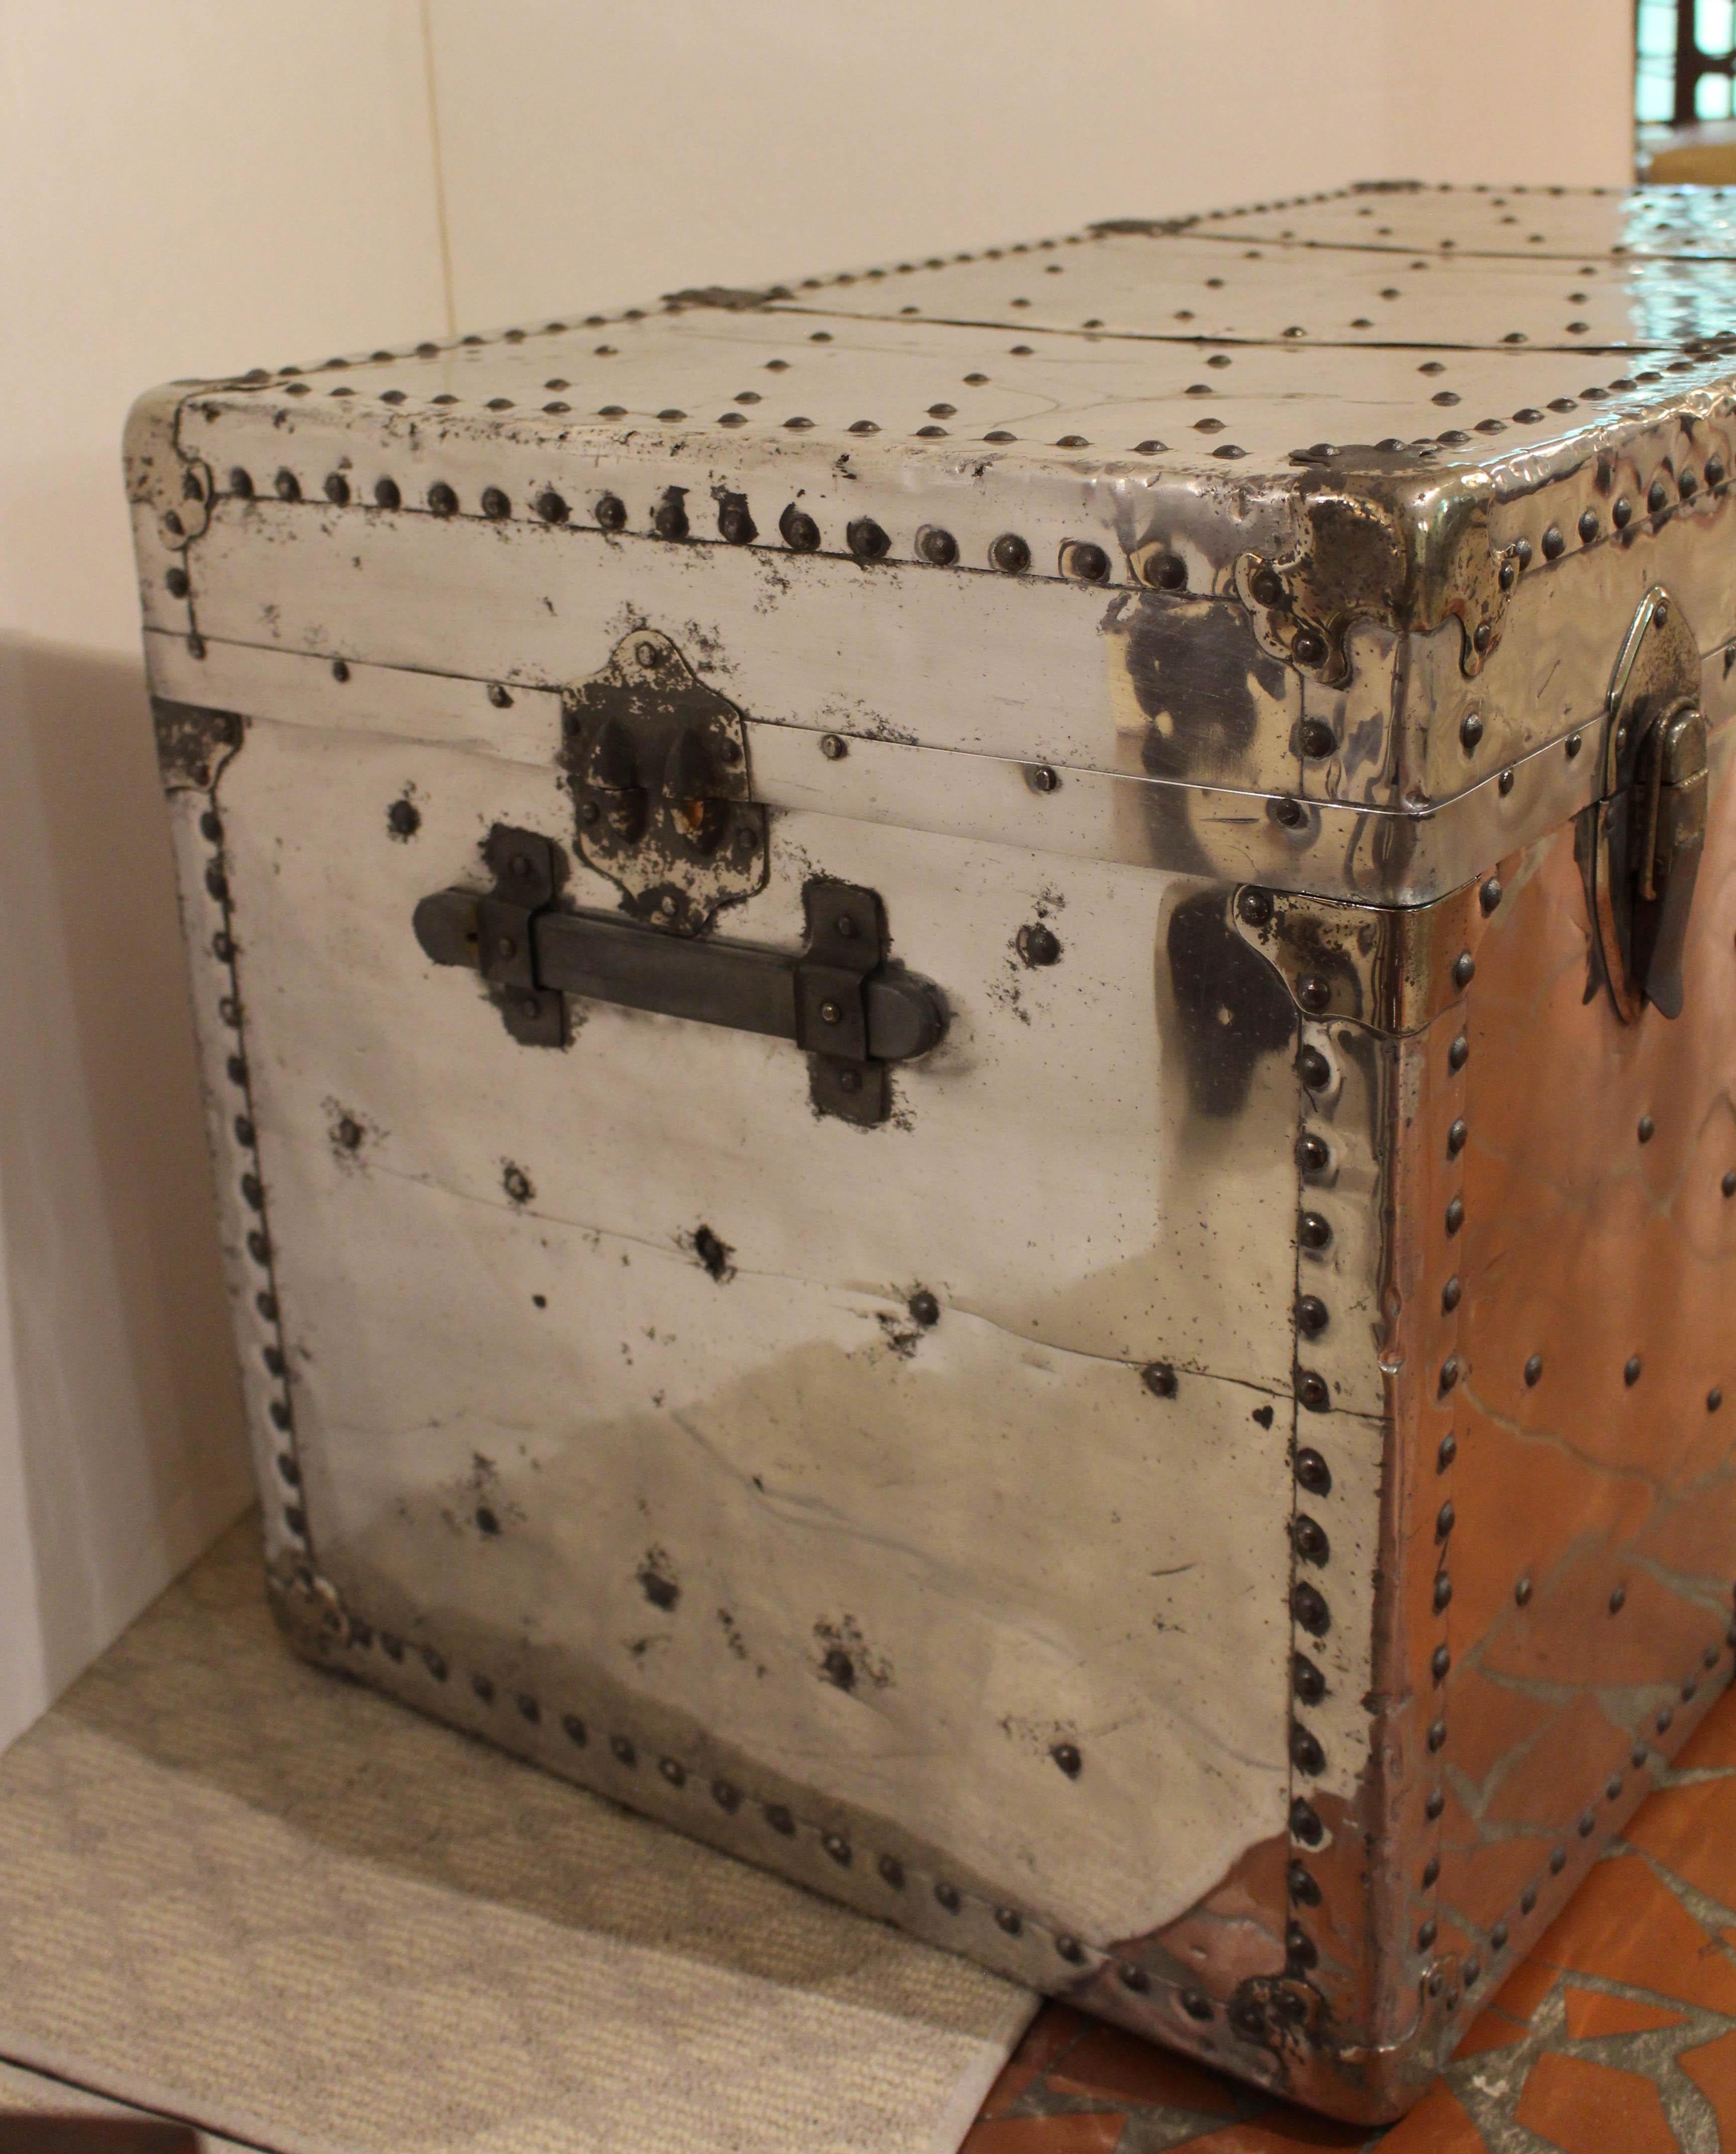 Art Modern, c.1940, large polished aluminum clad aviation travel trunk, English. Extensively studded on all surfaces. Shaped corner protectors. Side carrying handles.

Whitehall Antiques is a family business that has been a major source for the